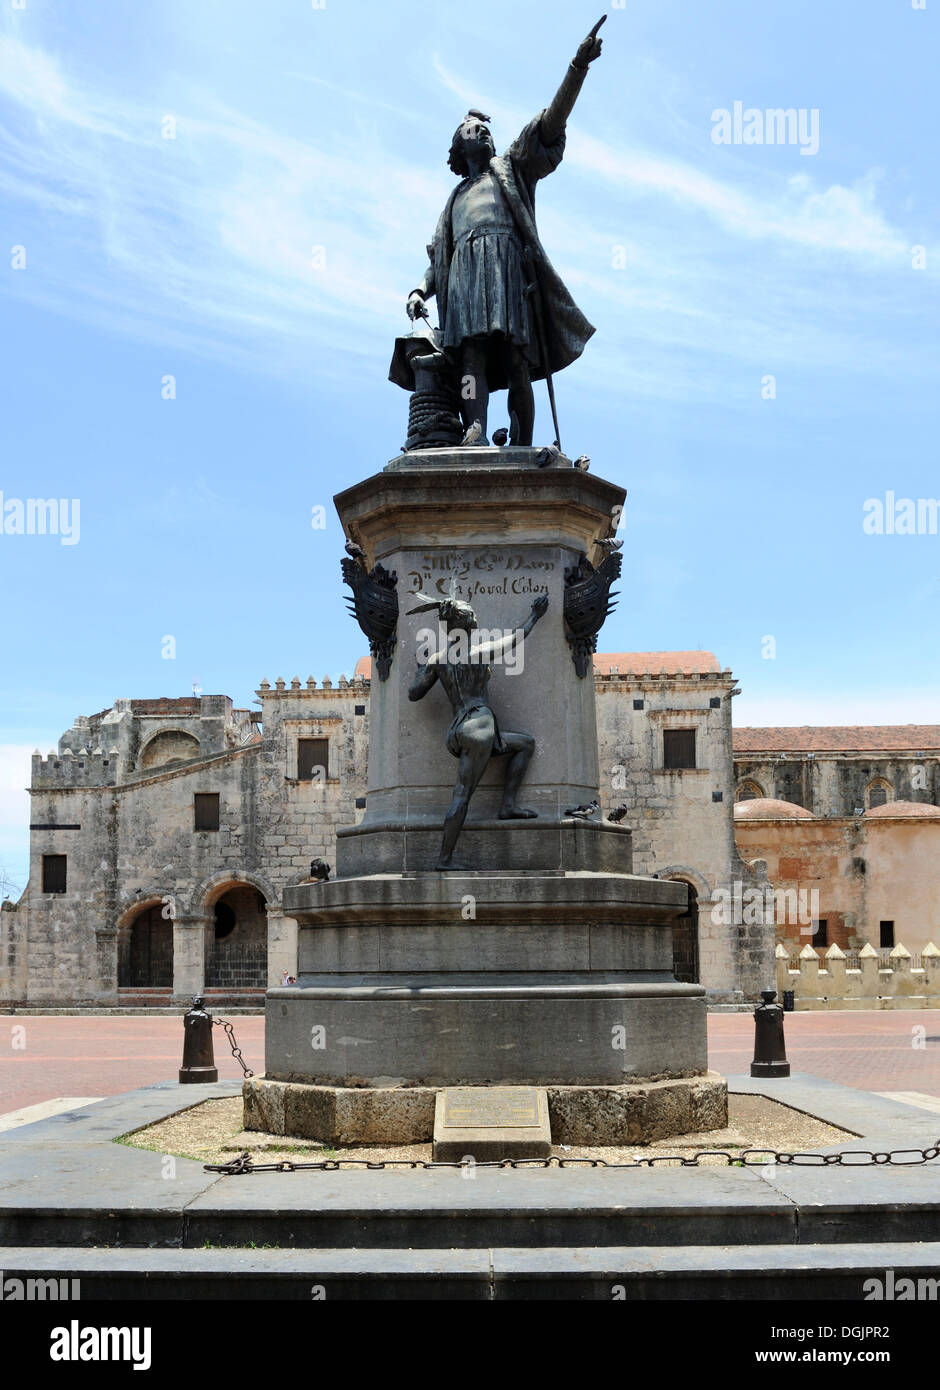 Plaza Colon square with Columbus Monument and Cathedral Santa Maria la Menor, oldest cathedral in the New World, 1532 Stock Photo